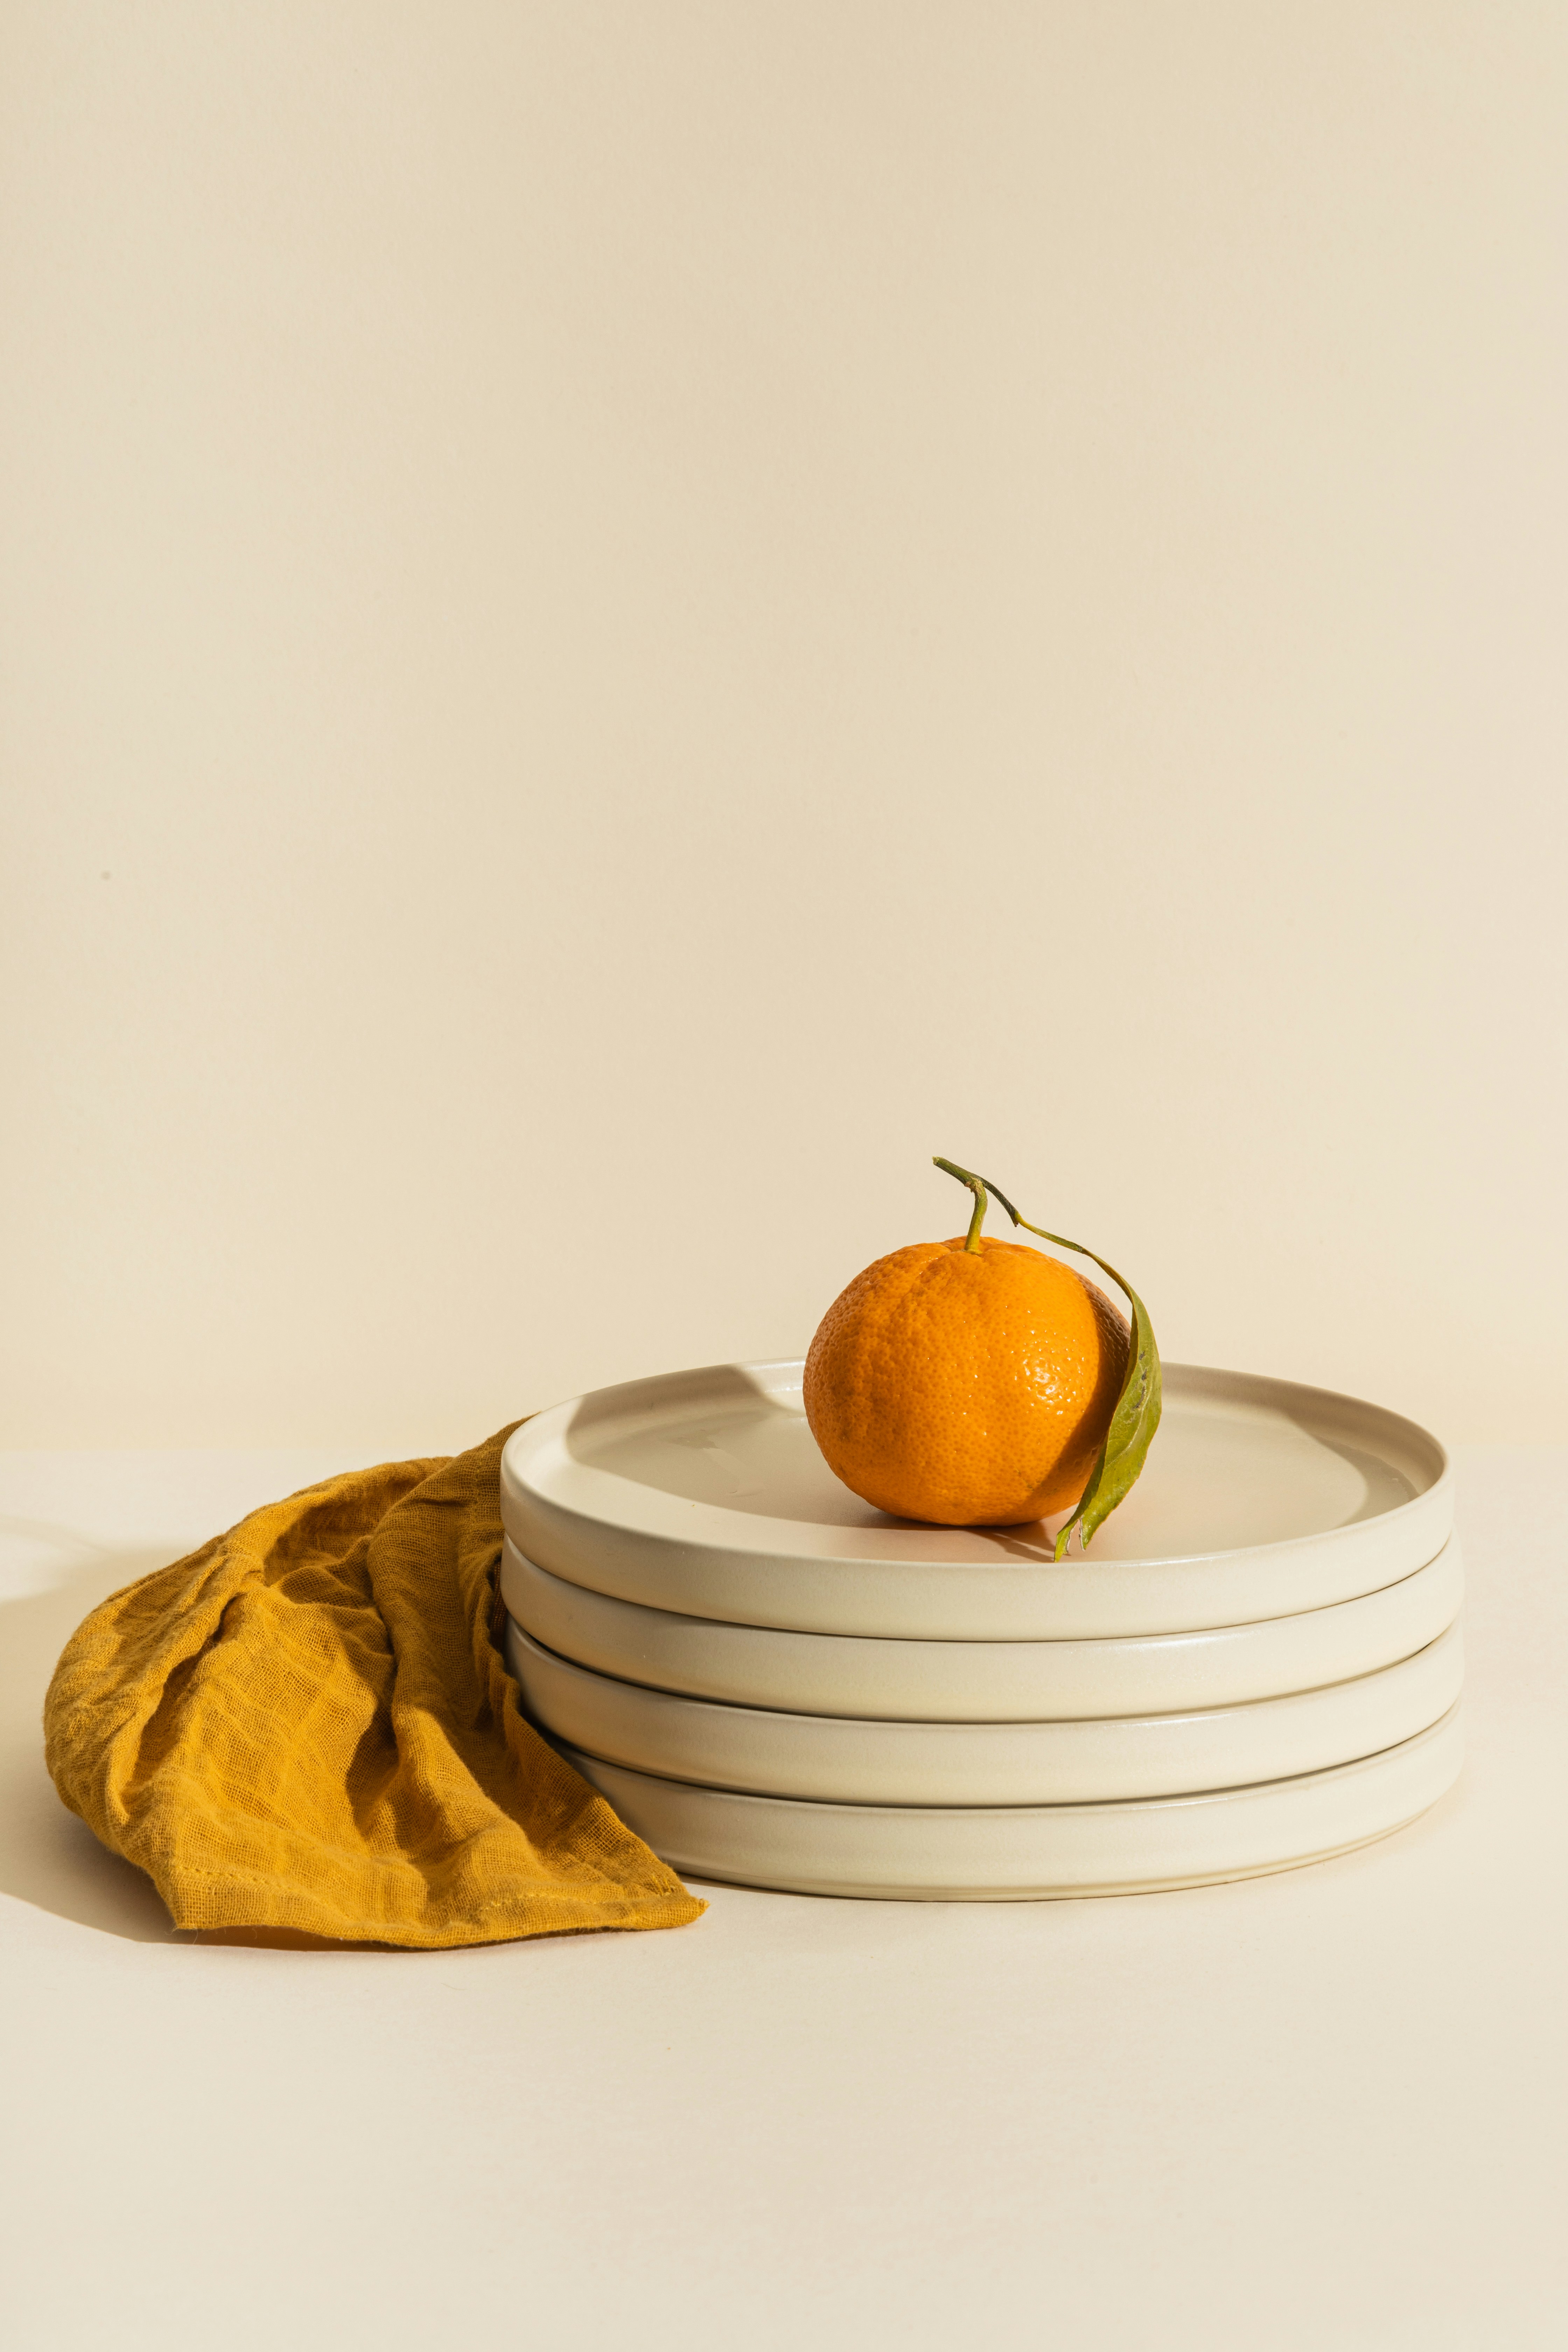 great photo recipe,how to photograph yellow apple fruit on white round plate